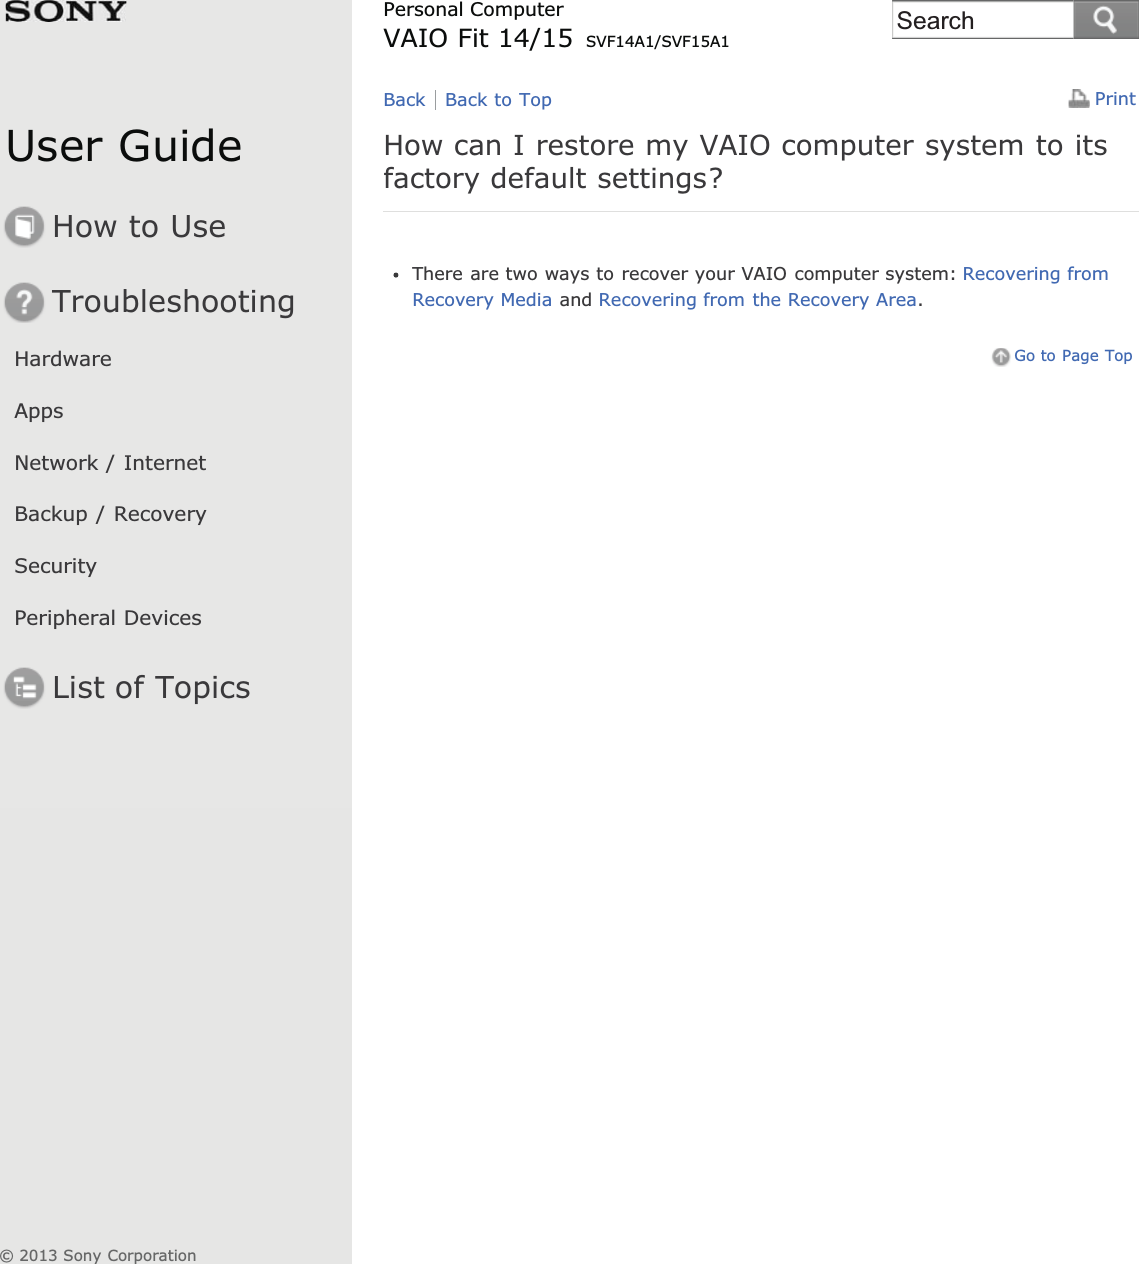 User GuideHow to UseTroubleshootingHardwareAppsNetwork / InternetBackup / RecoverySecurityPeripheral DevicesList of TopicsPrintPersonal ComputerVAIO Fit 14/15 SVF14A1/SVF15A1How can I restore my VAIO computer system to itsfactory default settings?There are two ways to recover your VAIO computer system: Recovering fromRecovery Media and Recovering from the Recovery Area.Go to Page TopBack Back to Top© 2013 Sony CorporationSearch